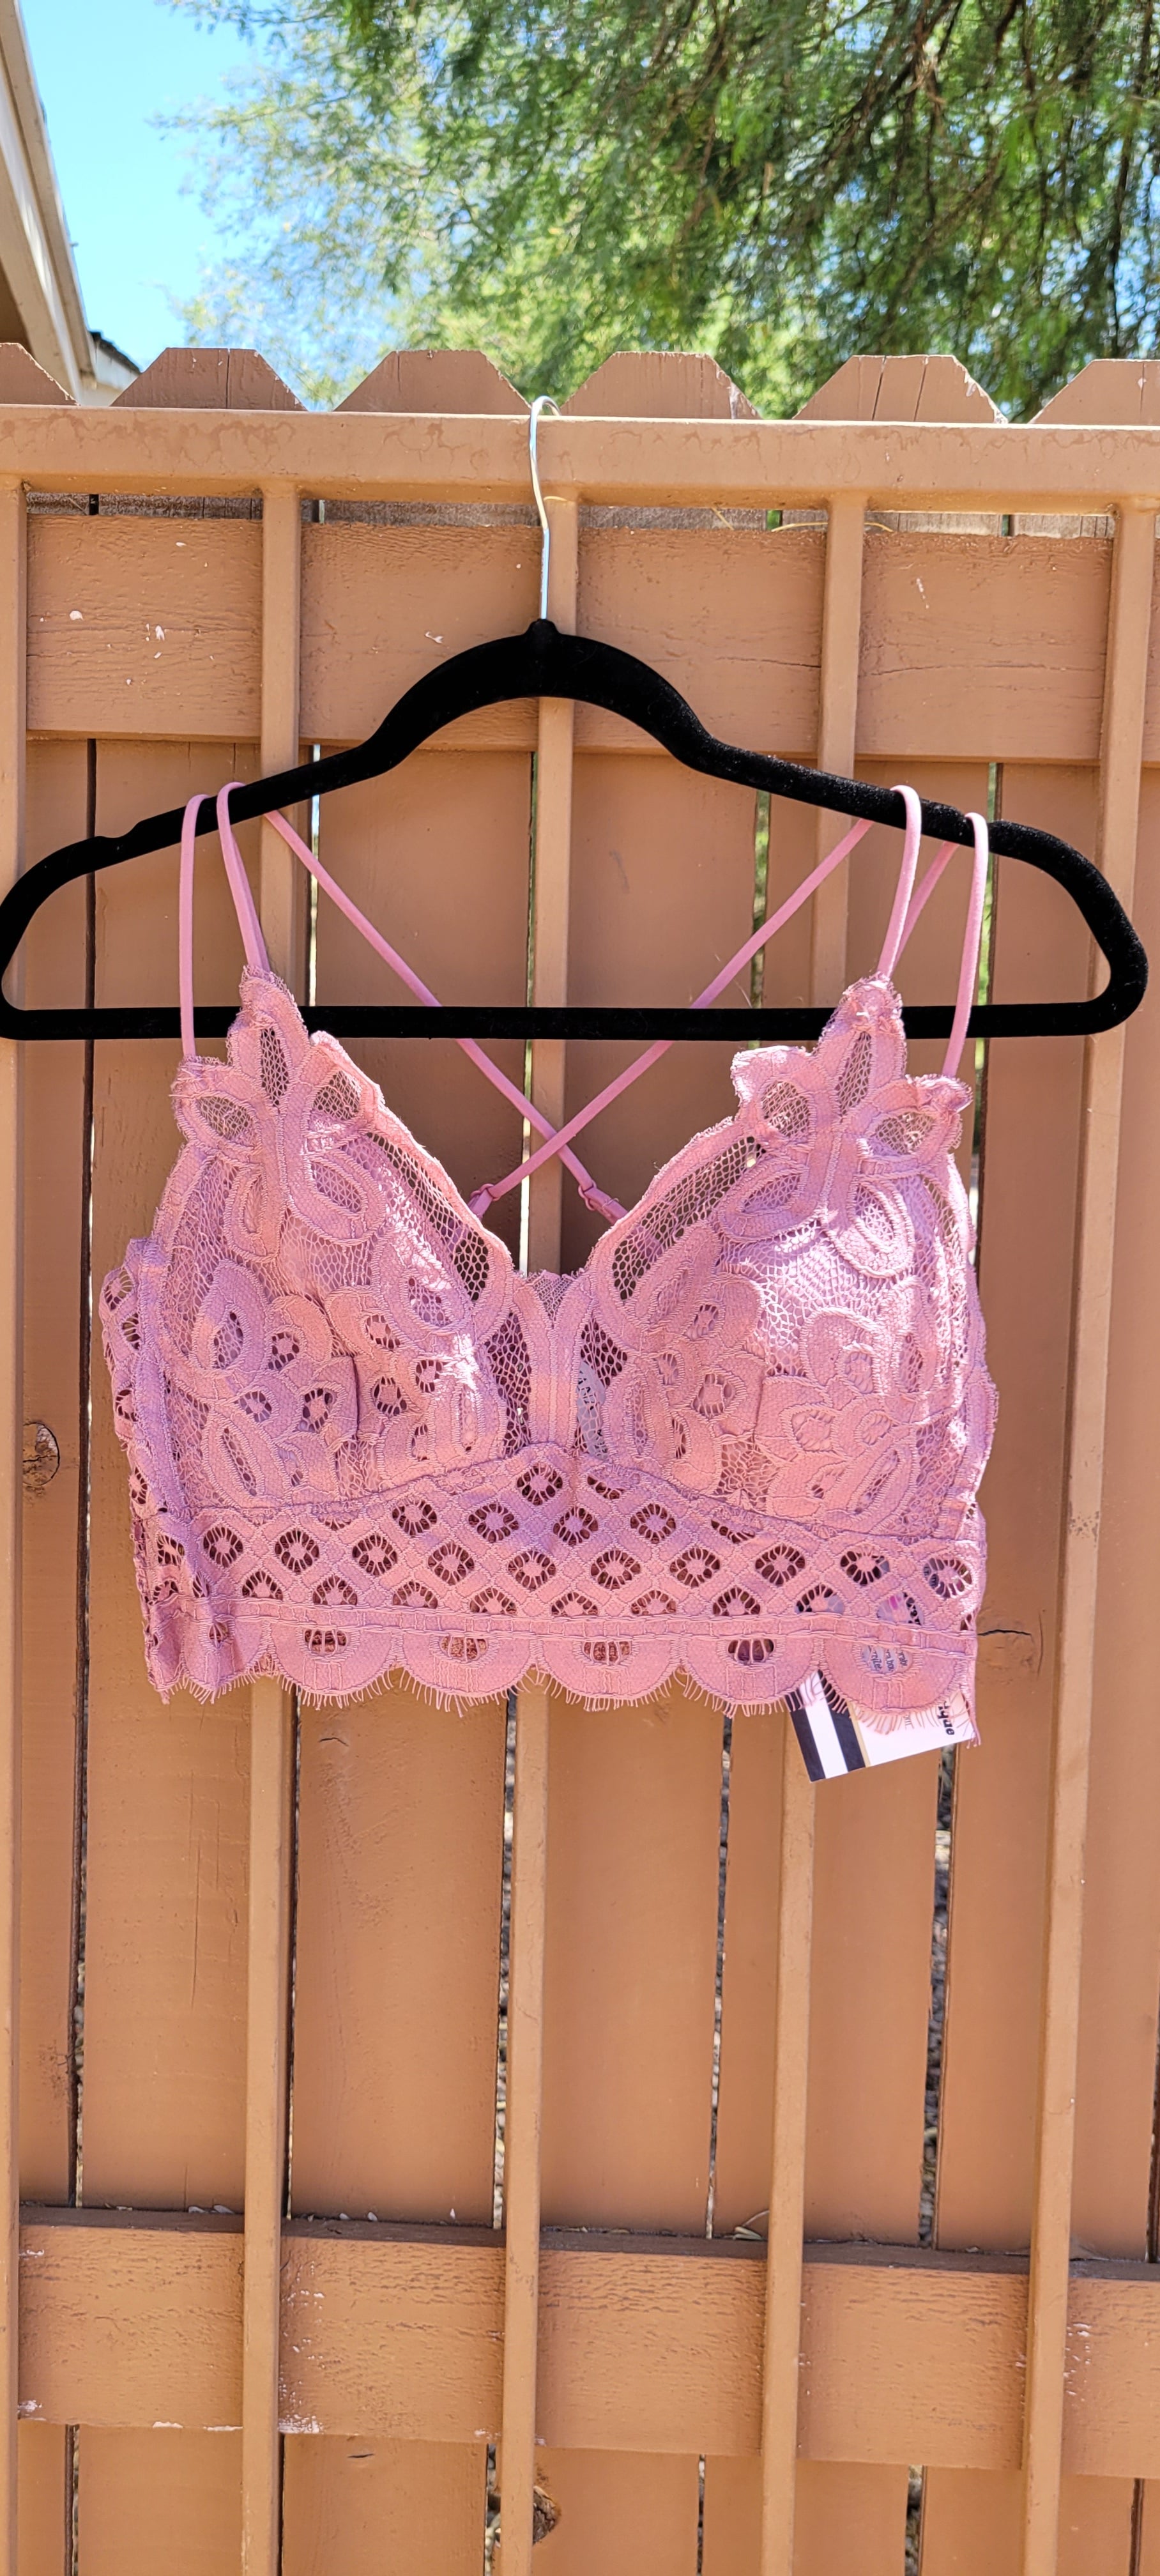 This bralette is a must have staple piece! It is easy for layering or great all by itself! This bralette is super comfy and can easily replace your current bra. No need to worry about clasps, this bralette easily slips over your head. It also features a floral crochet lace, ruched stretchy back, four adjustable straps with crisscross detail in back, and removable bra pads. Color is dusty rose. Pair with your favorite jacket or off the shoulder sweater. Don’t be afraid to get creative! Sizes small to x-large